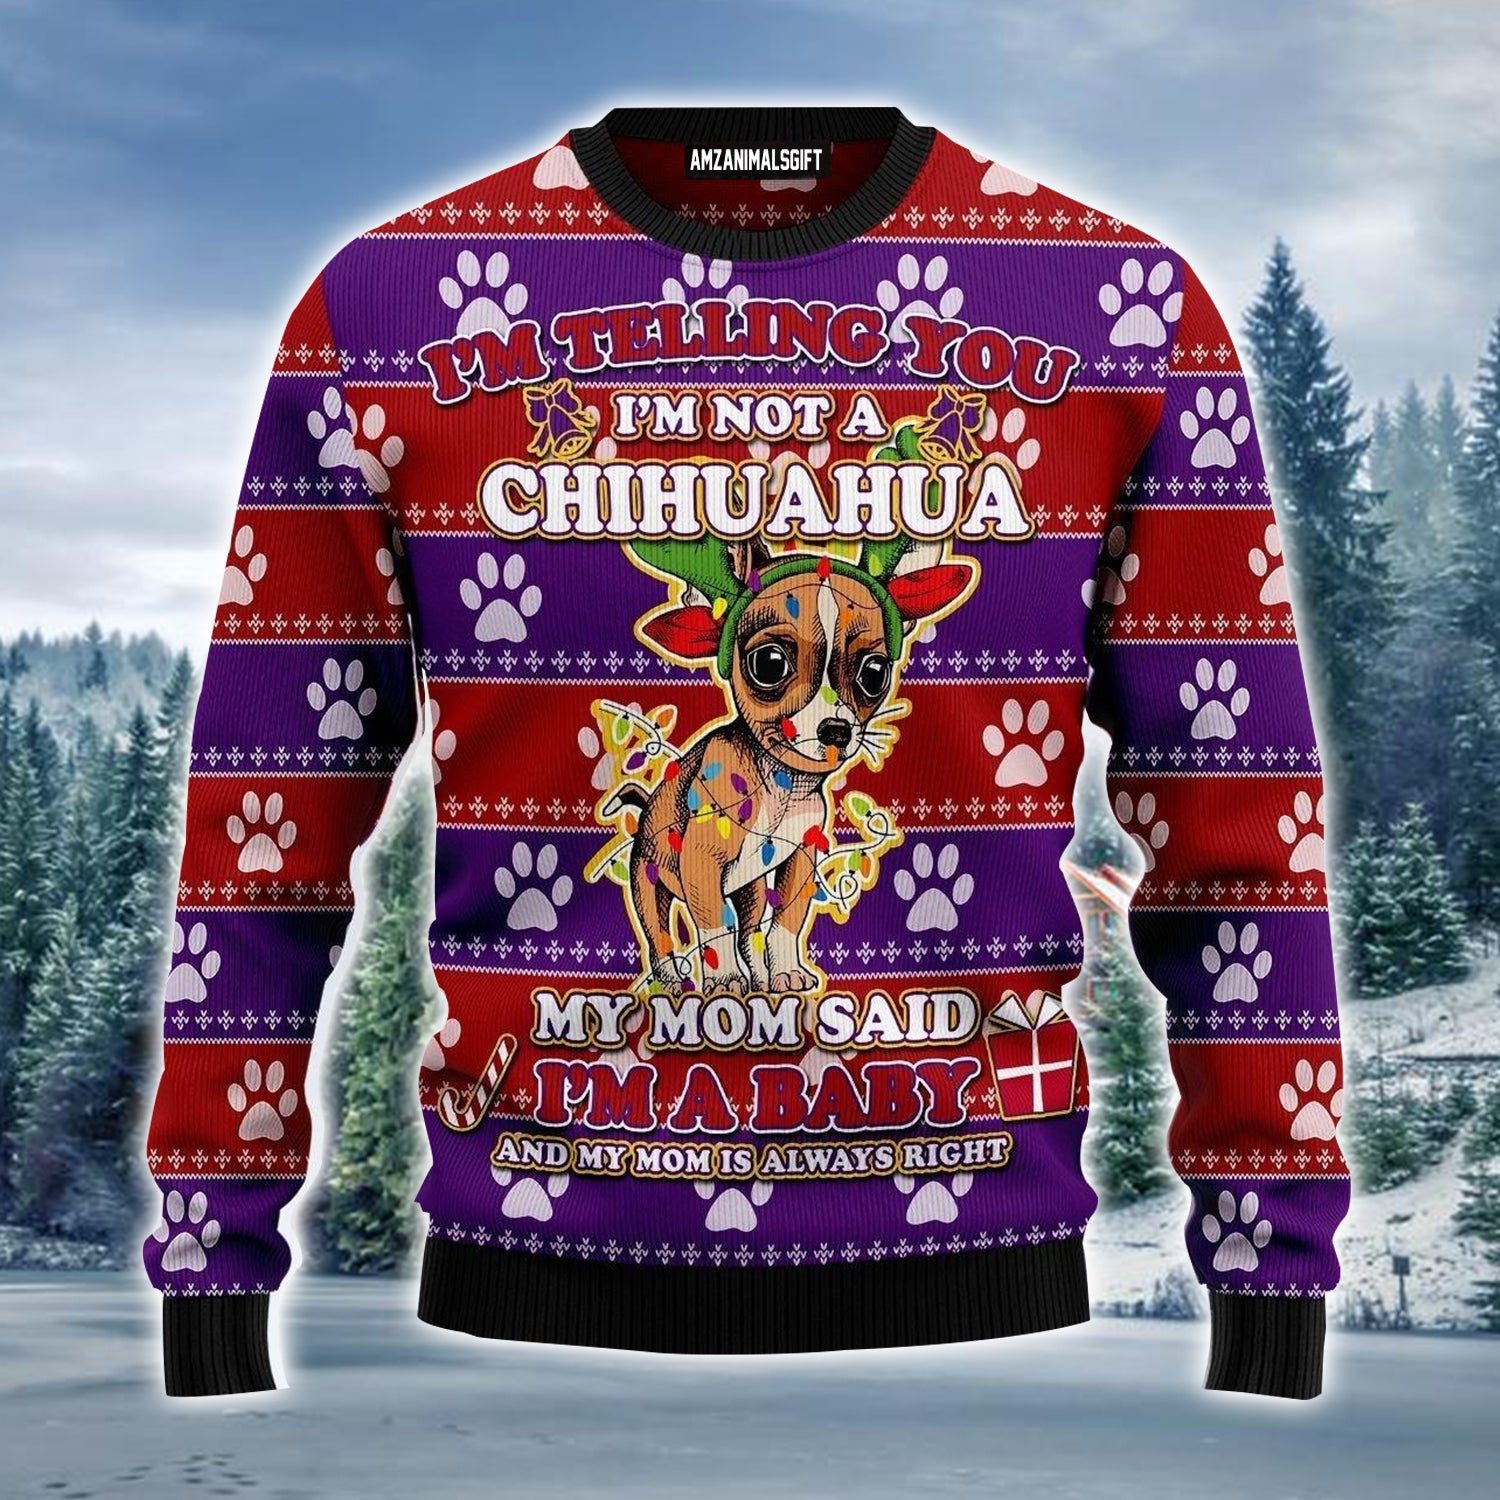 Chihuahua Baby Ugly Christmas Sweater, Chihuahua Loves Xmas, I'm Not A Chihuahua Ugly Sweater For Men & Women - Gift For Christmas, Chihuahua Lovers